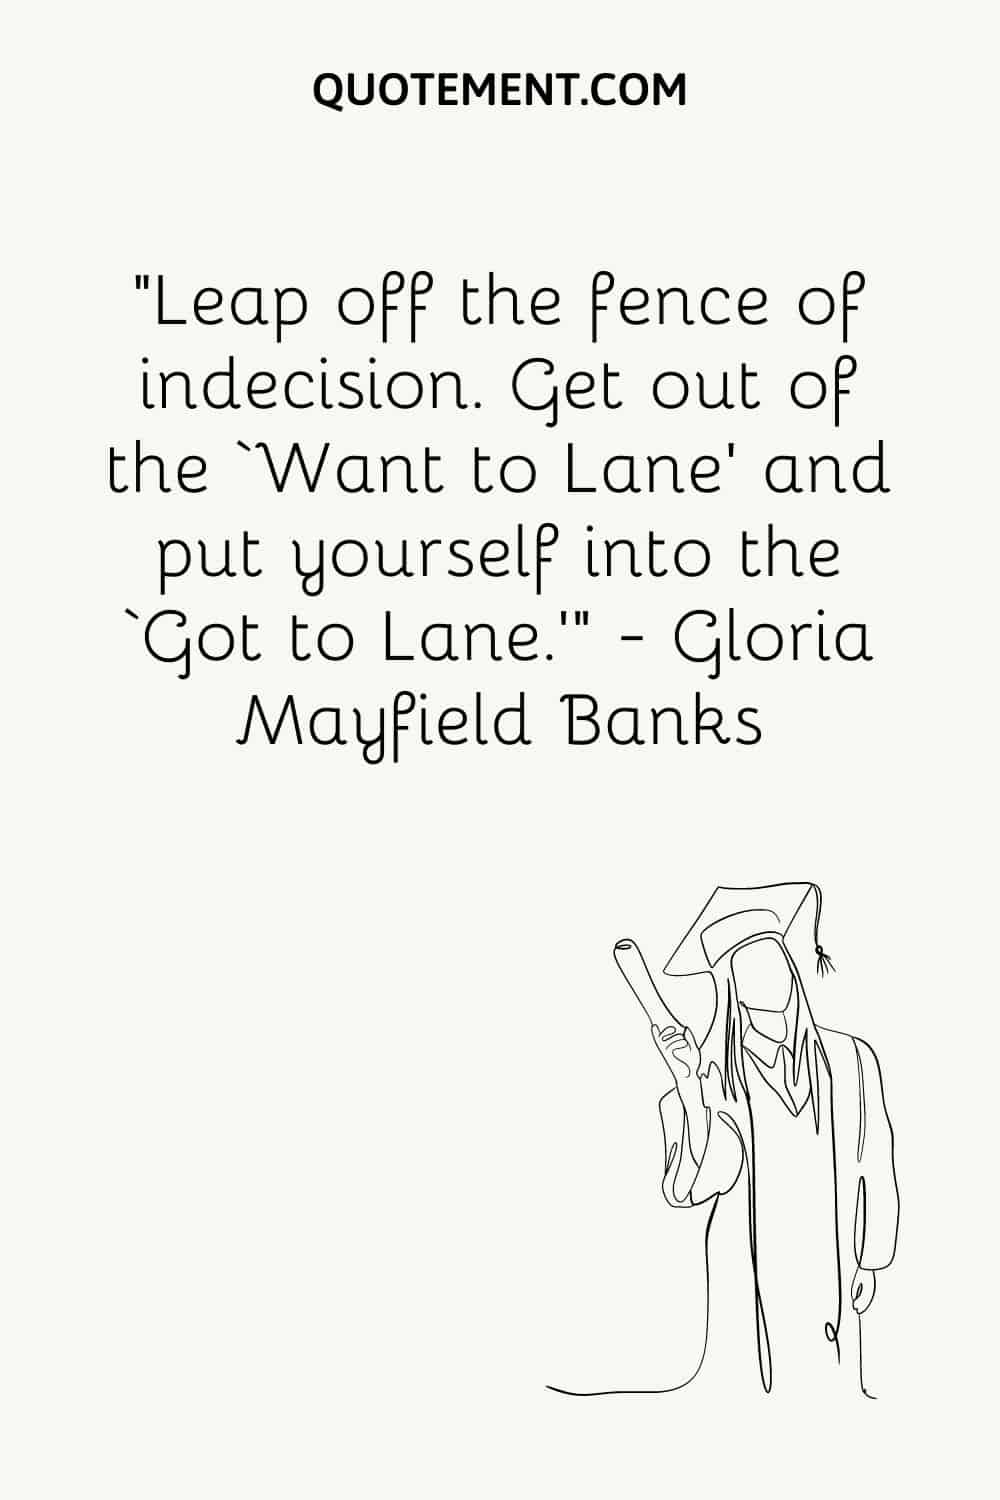 Leap off the fence of indecision. Get out of the ‘Want to Lane’ and put yourself into the ‘Got to Lane